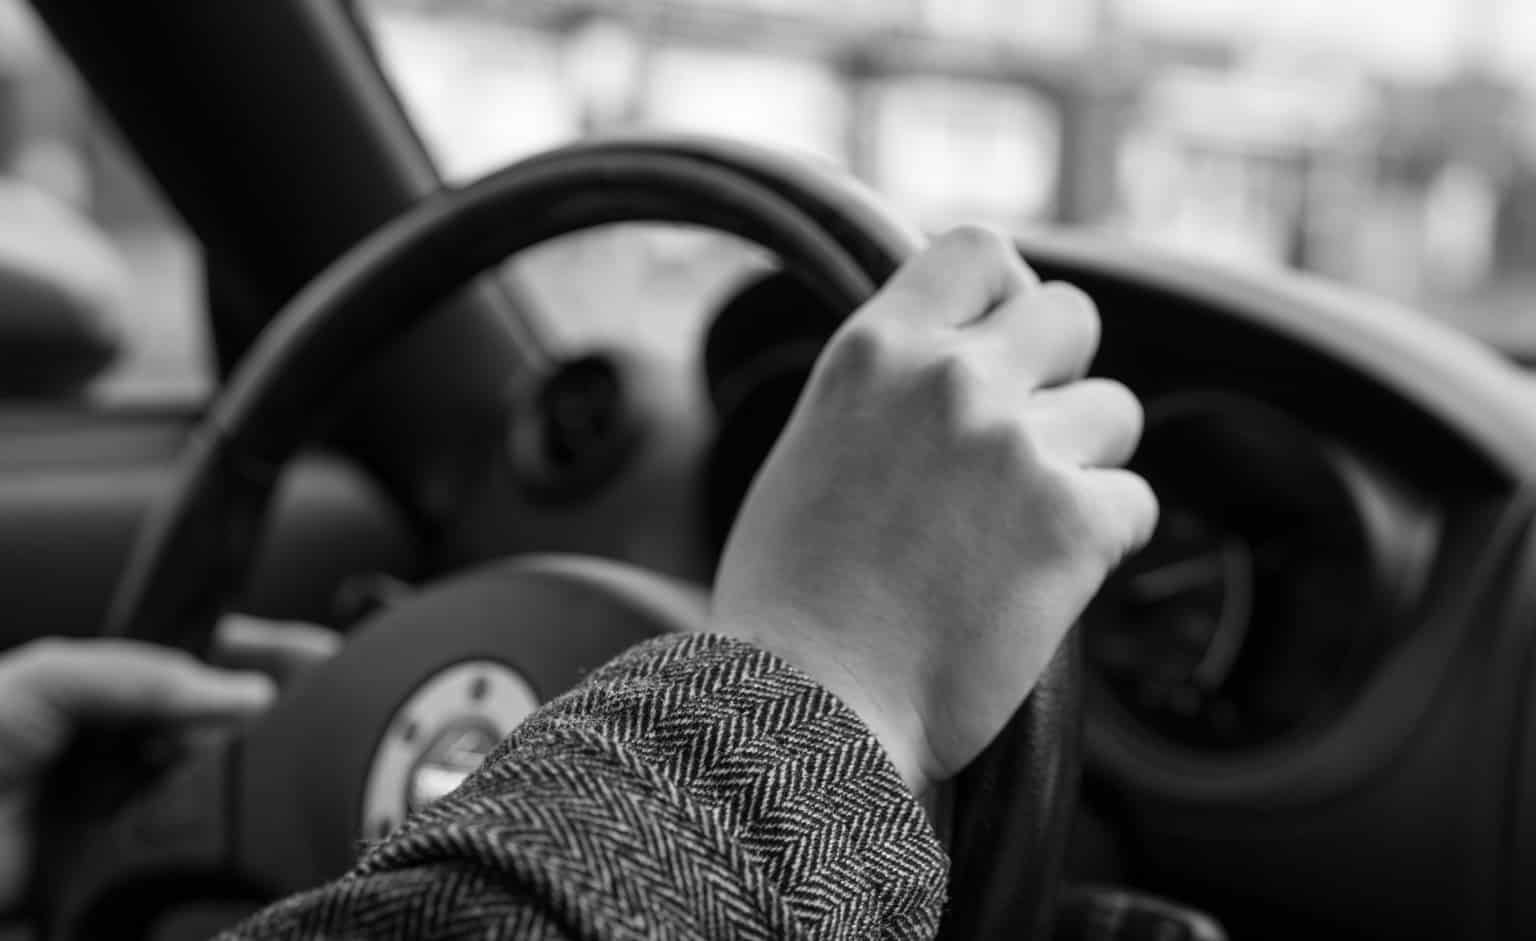 Tips for Bringing More Focus to Your Driving